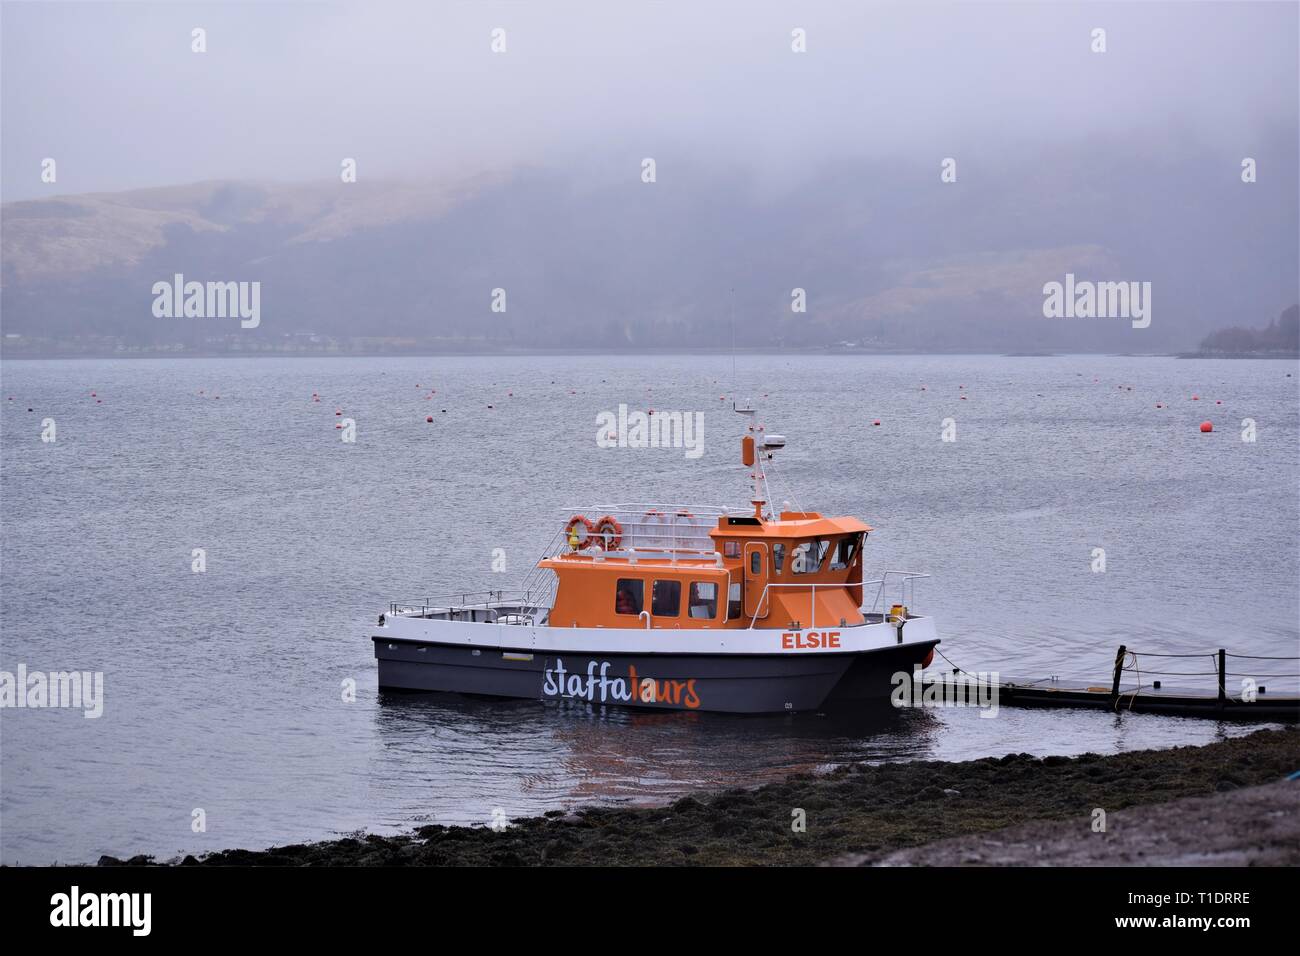 Staffa Tours Boat Elsie at anchor on Loch Creran shore in mist opposite the Fish Farm Hatchery. A sense of lonely isolation in the so misty sea loch. Stock Photo